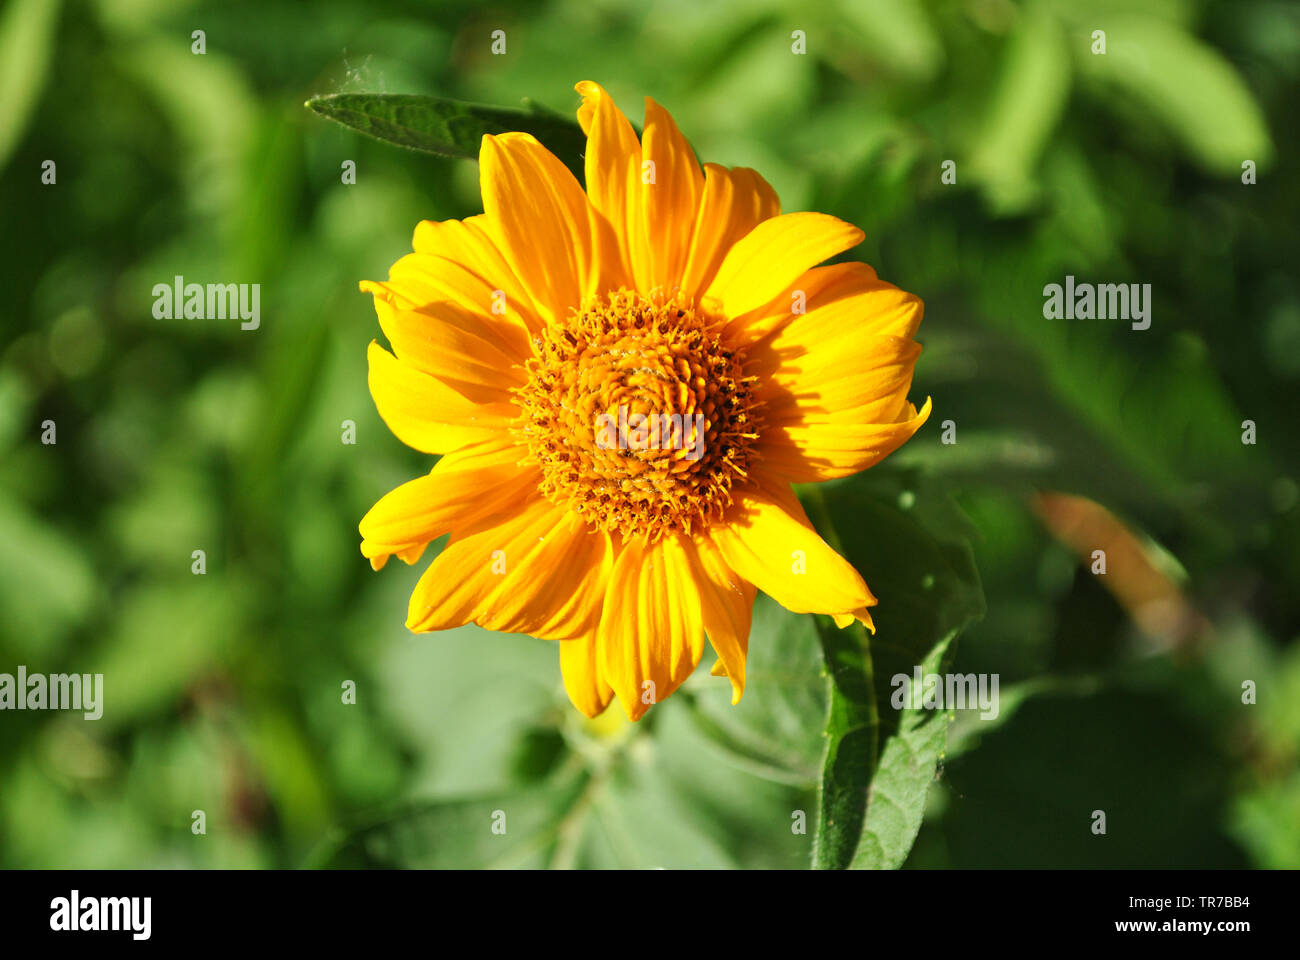 Yellow daisy blooming flower on grass background, top view close up detail Stock Photo